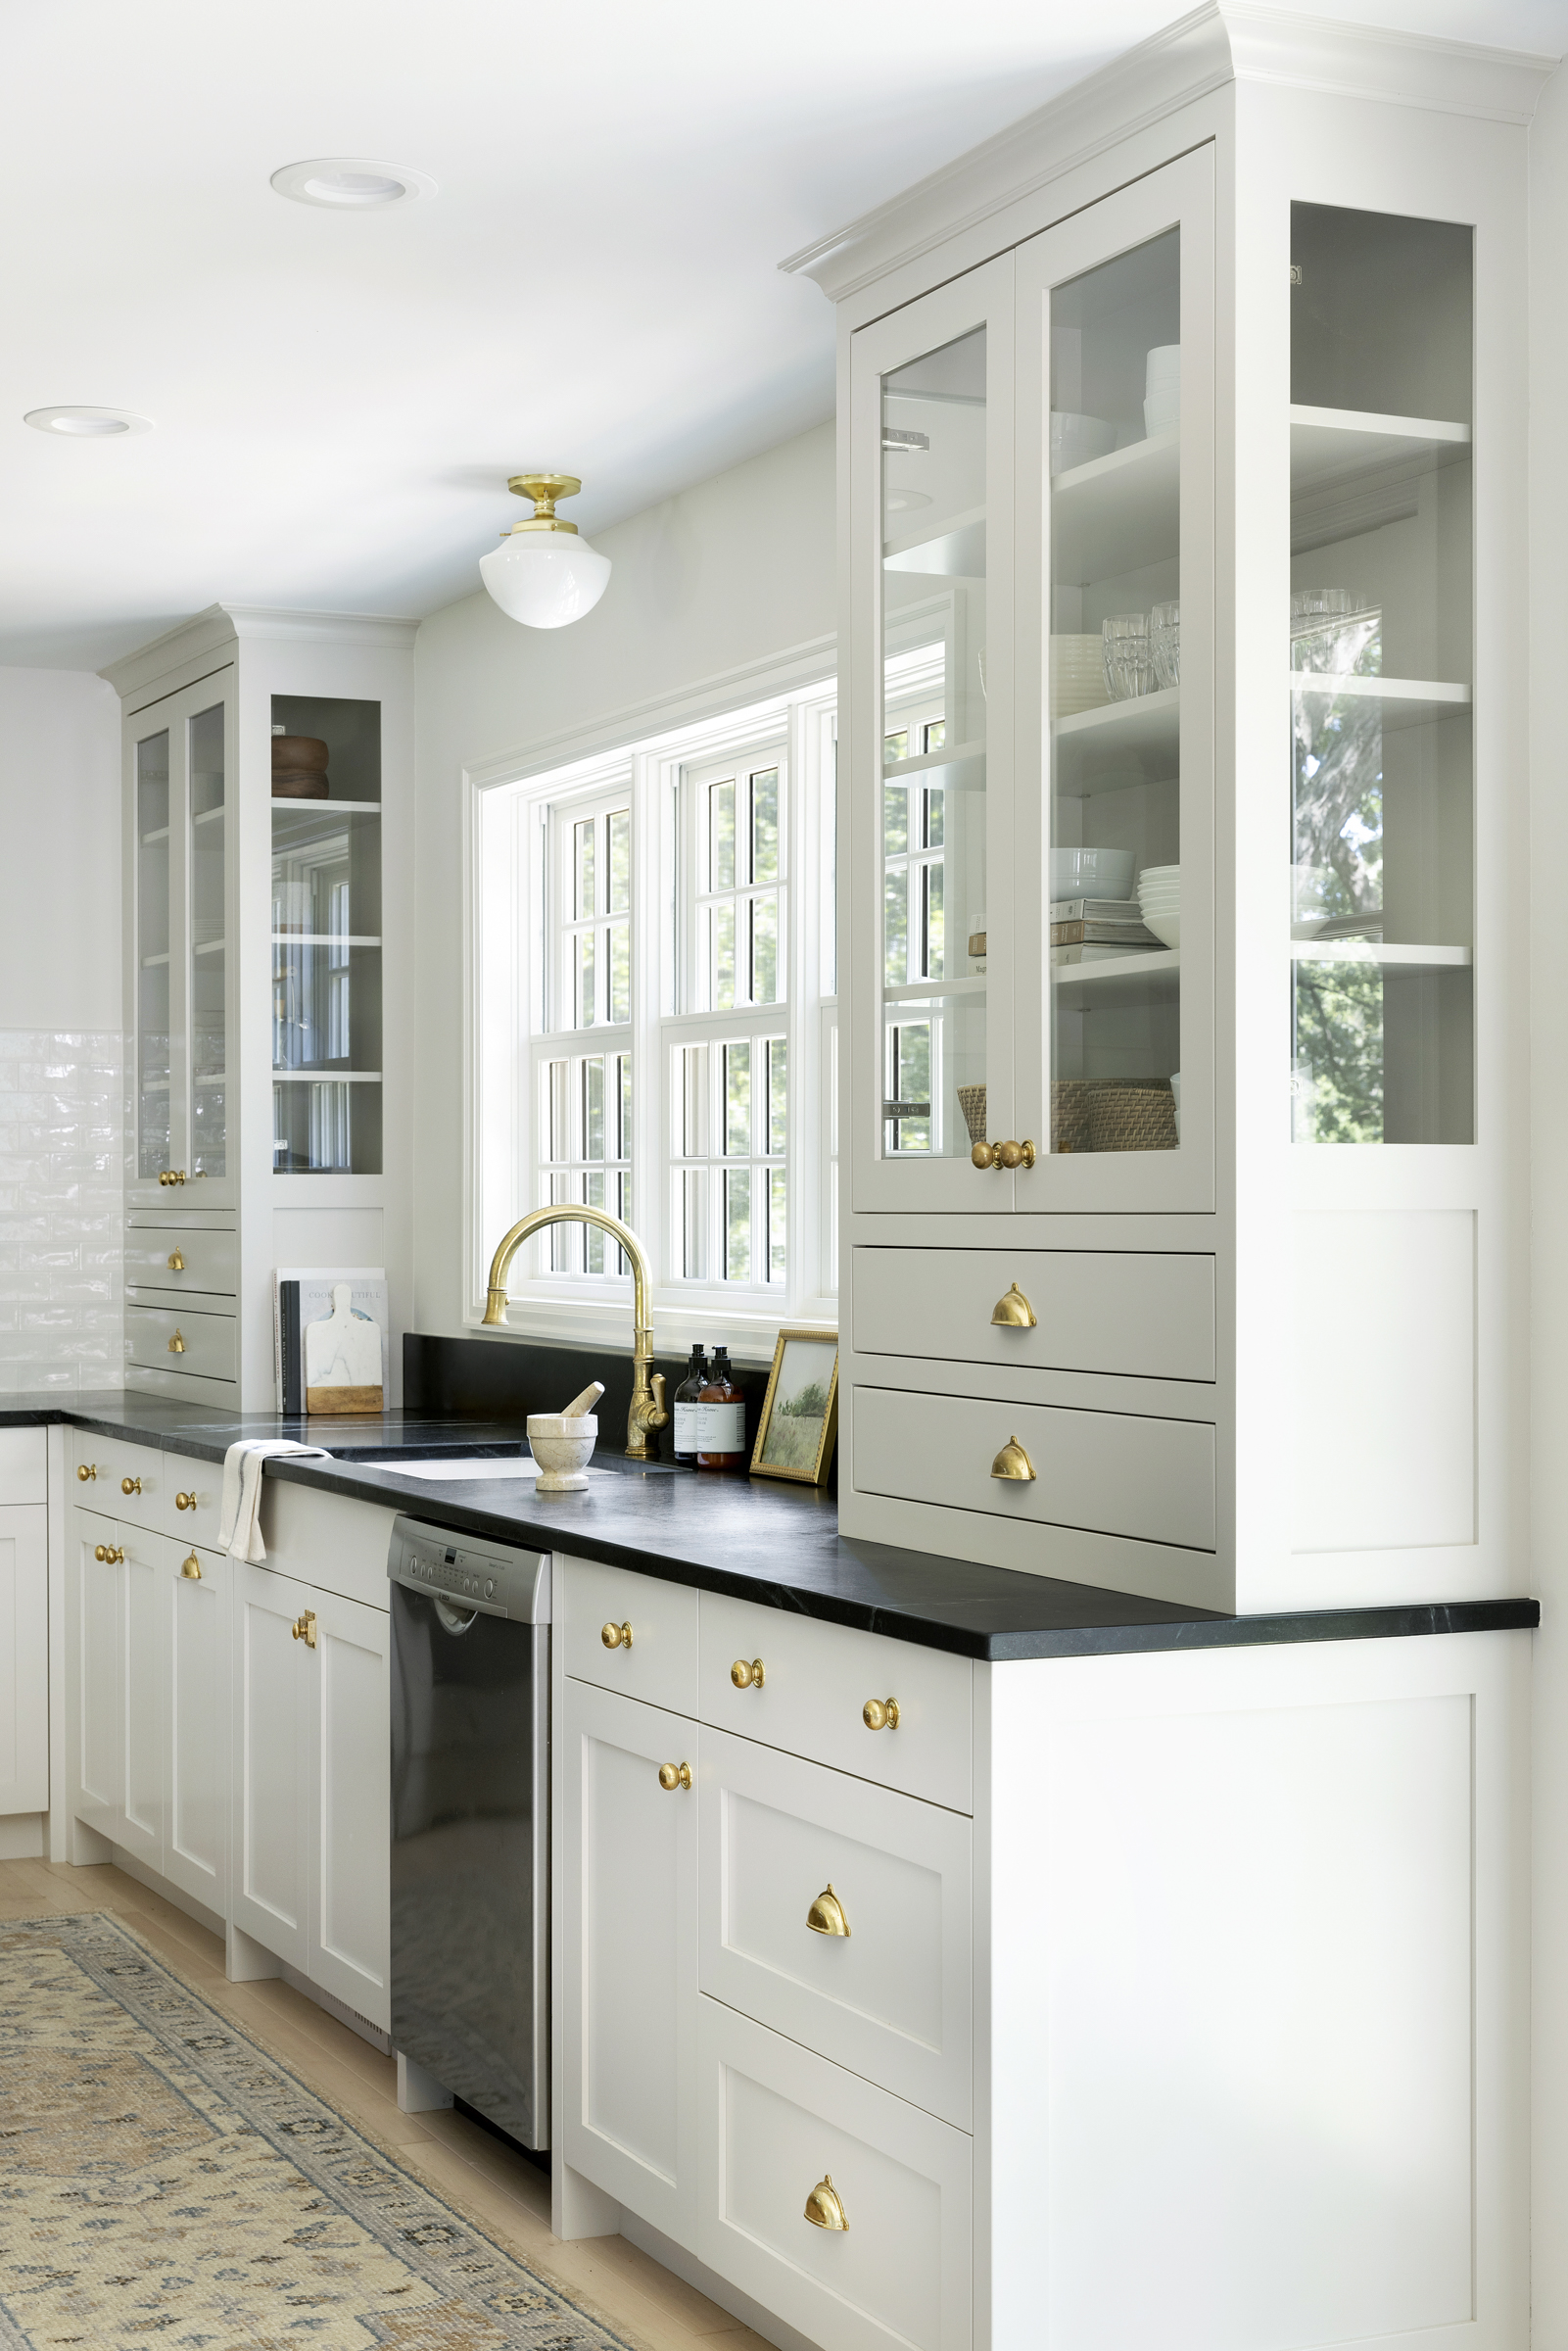 Twin Cities kitchen renovation with white perimeter cabinets, soapstone countertop, and brass hardware.